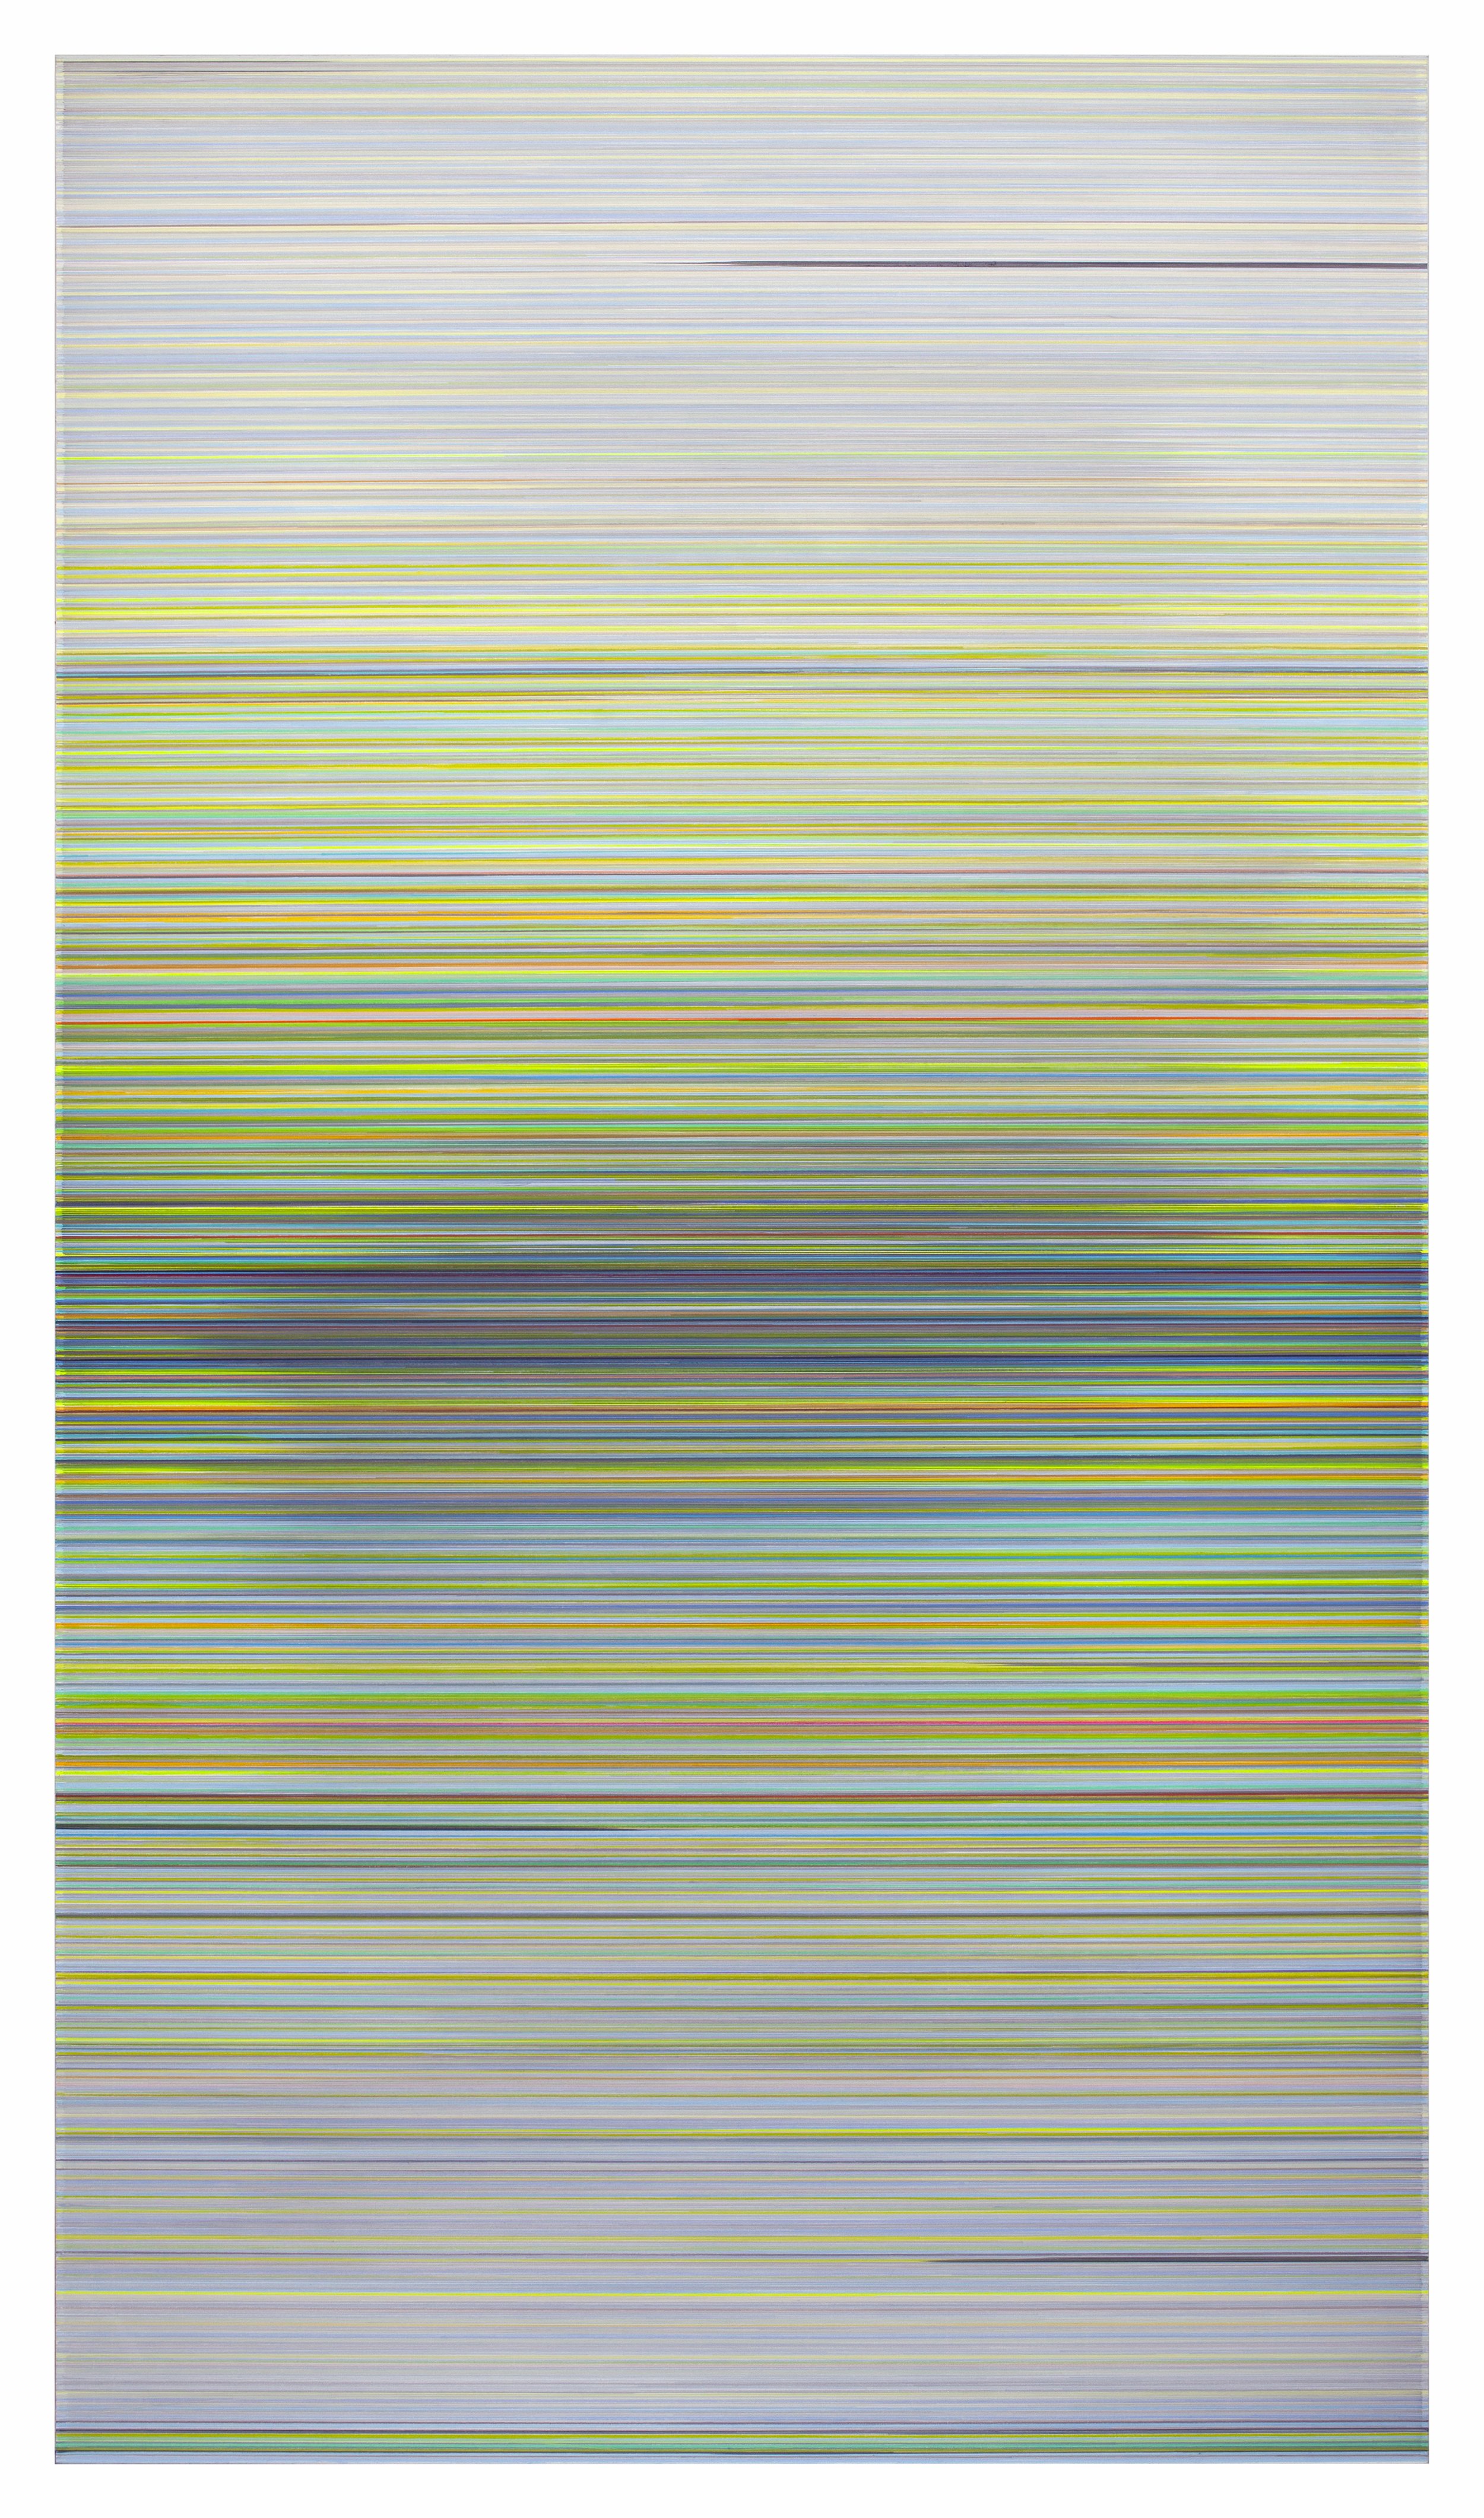    grene   2022 graphite and colored pencil on mat board 104 x 59 inches Arkansas Museum of Fine Arts Foundation Collection, Little Rock, AR 